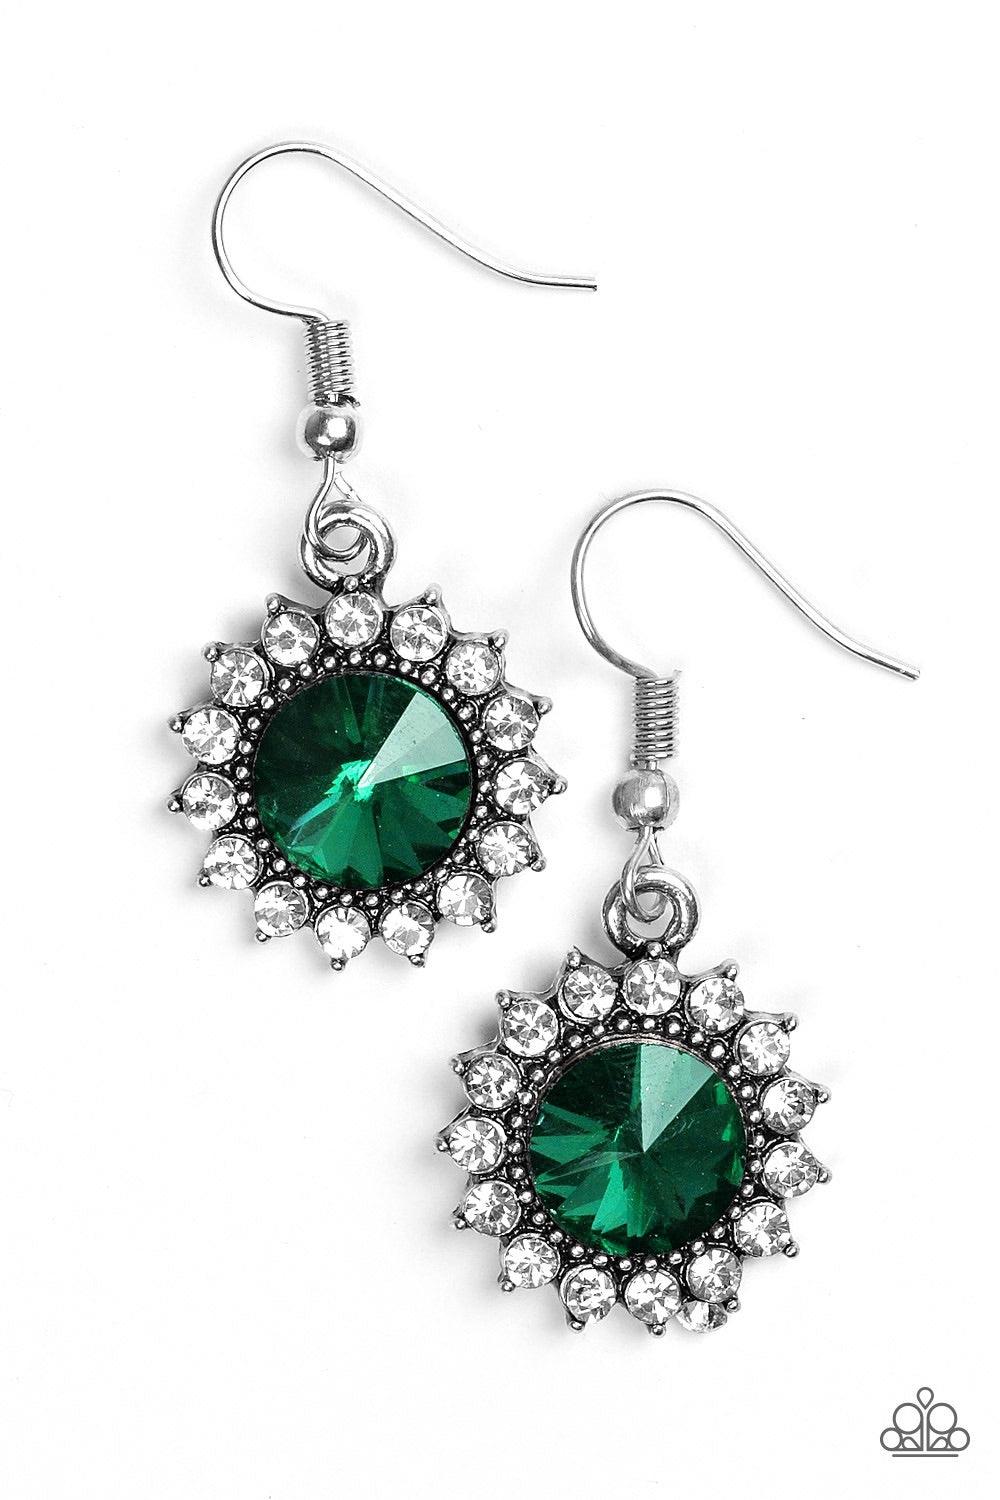 Paparazzi Accessories Bring In The BEAM Team - Green A glittery green rhinestone is pressed into a silver frame radiating with dainty white rhinestones for a glamorous look. Earring attaches to a standard fishhook fitting. Jewelry